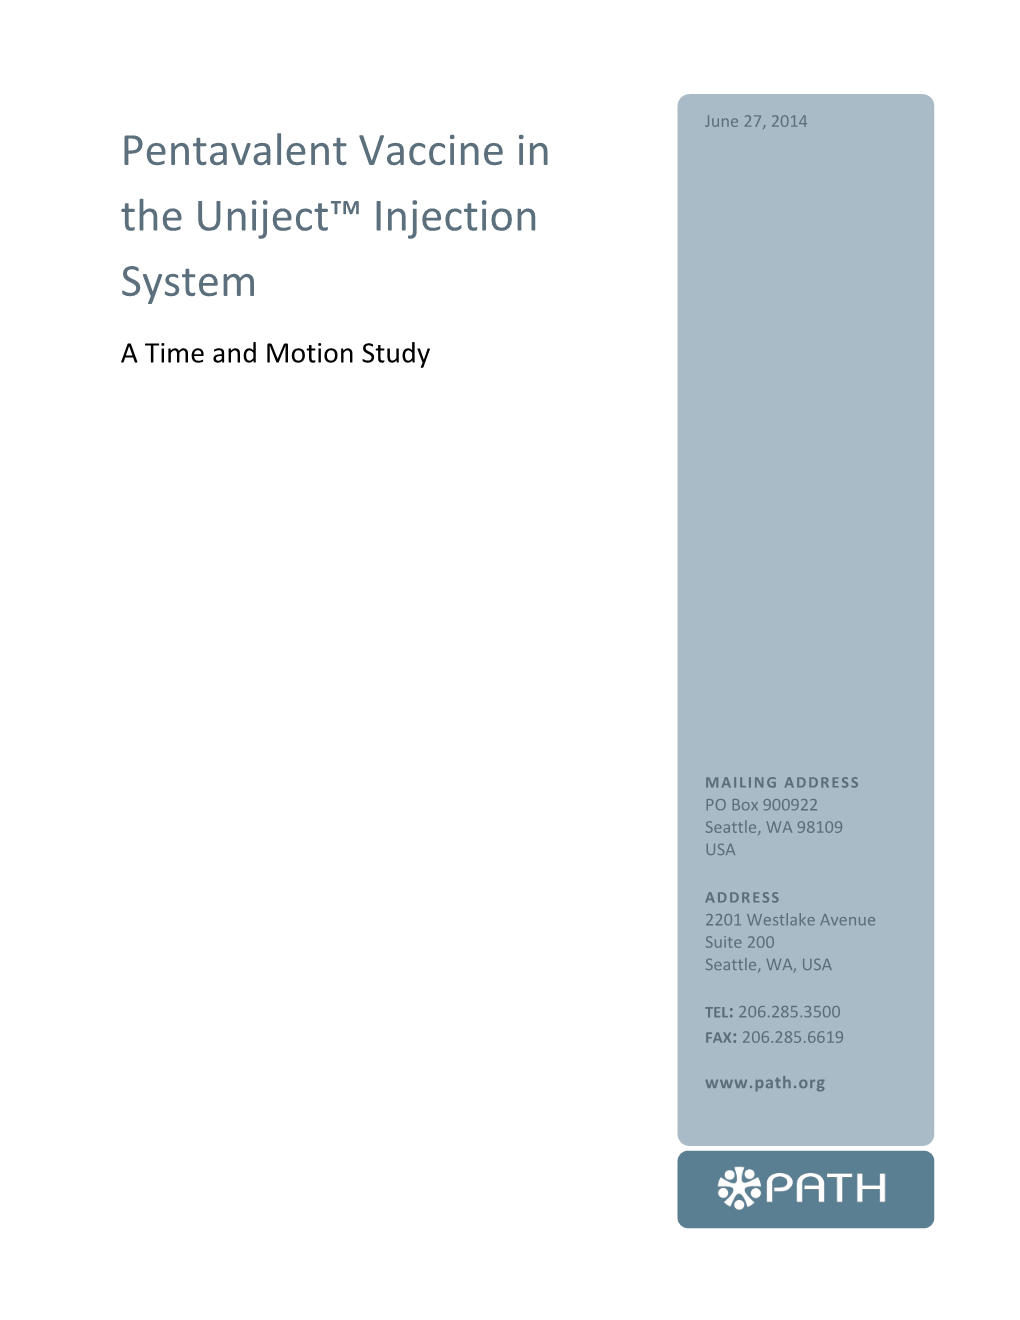 Pentavalent Vaccine in the Uniject™ Injection System: a Time And